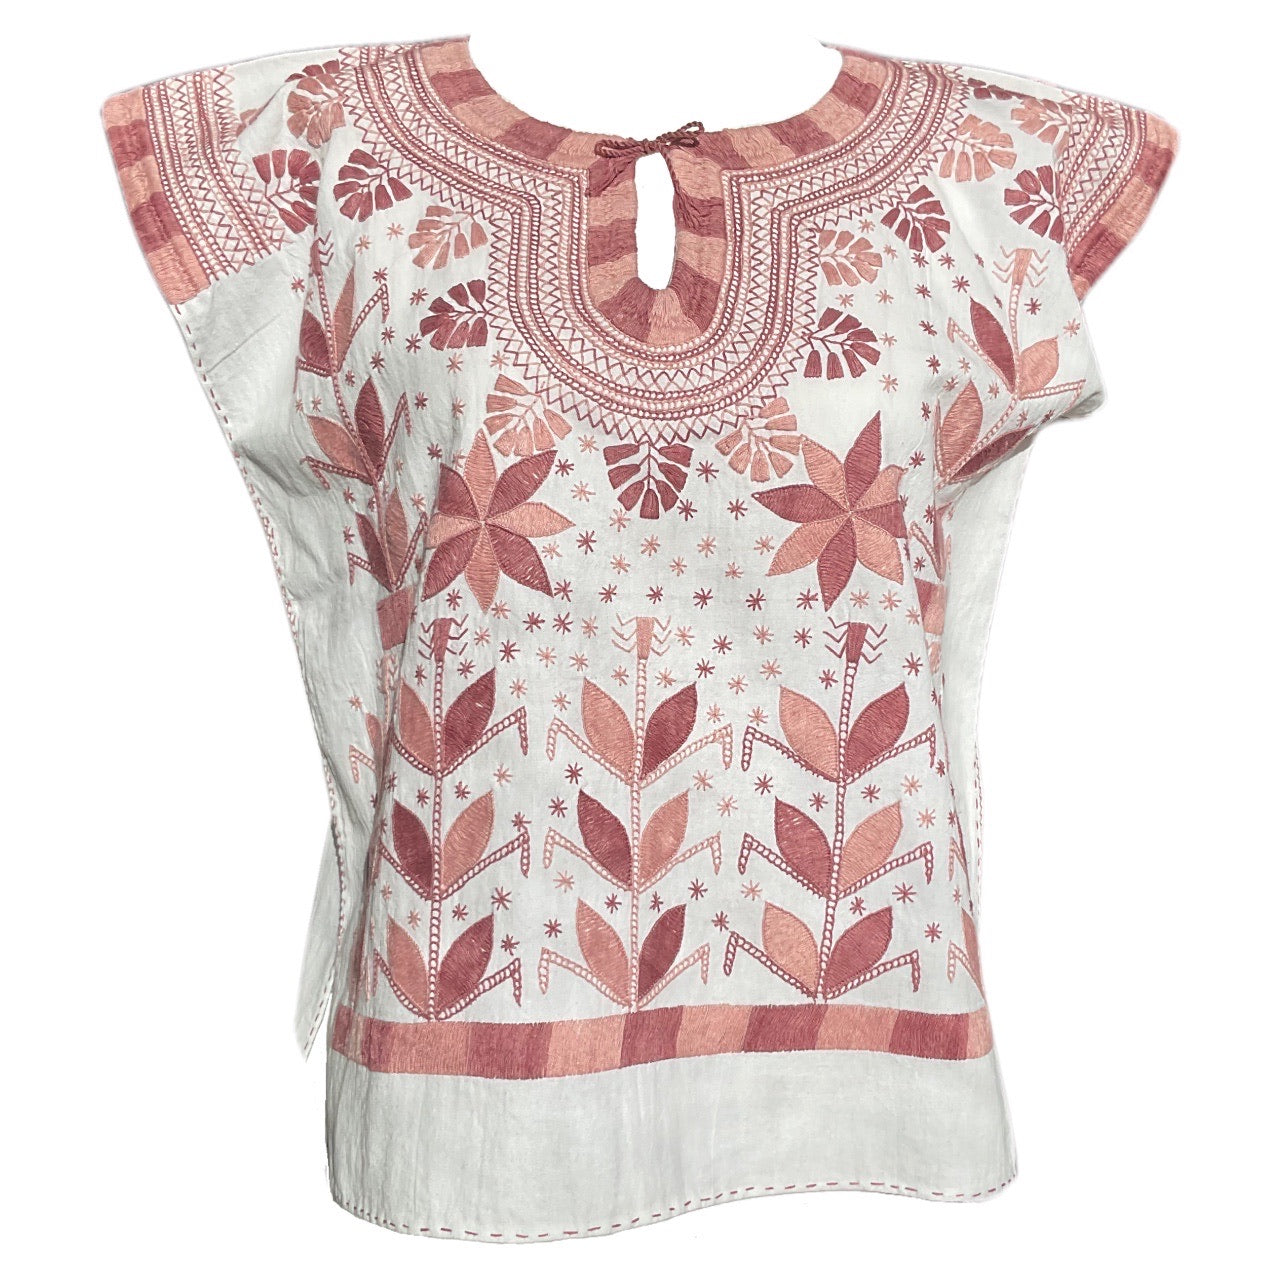 Hand embroidered blouse in dusty pink tones front view